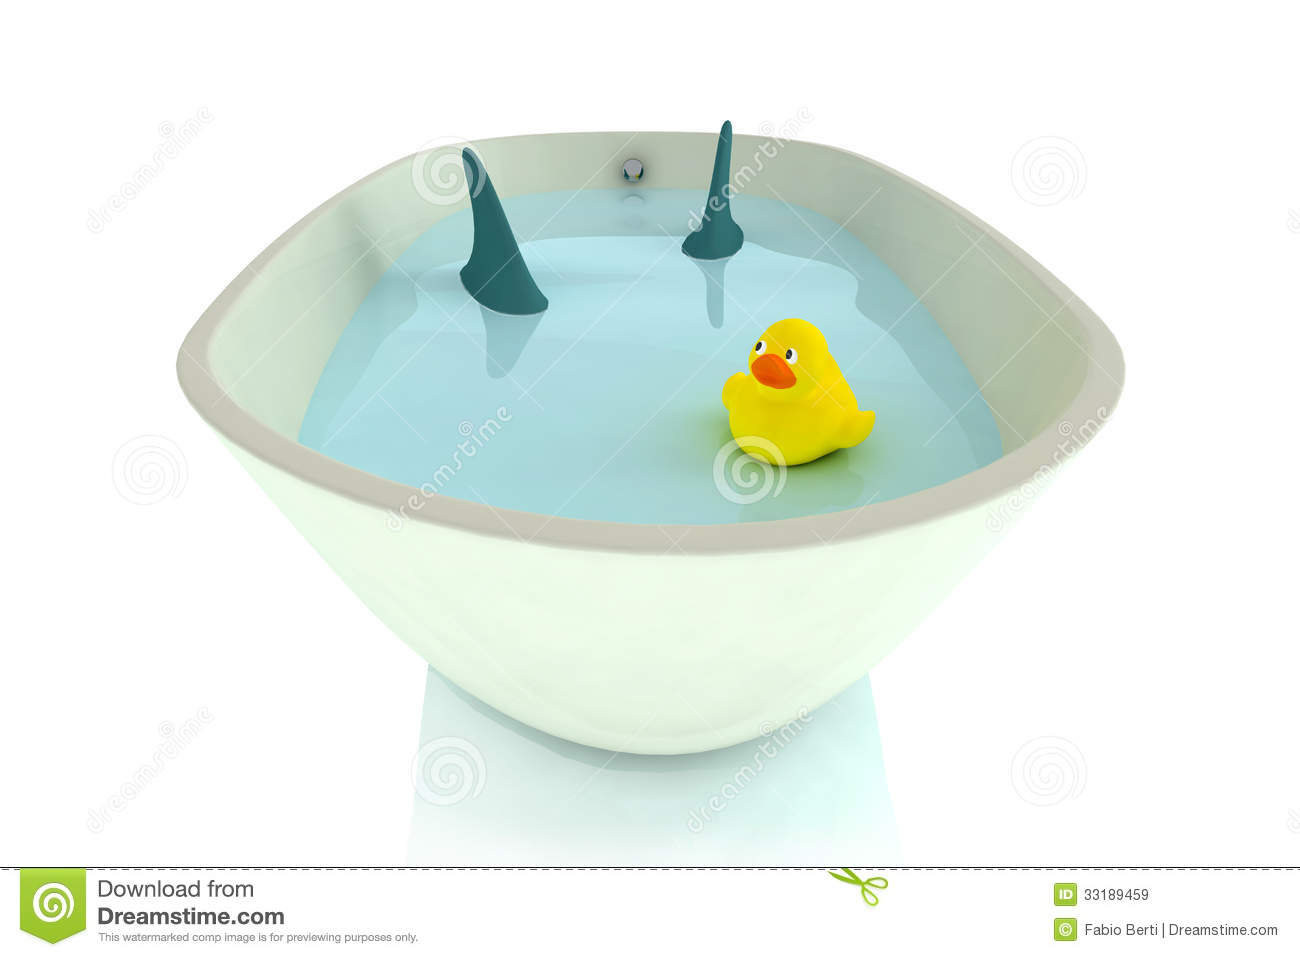 Endangered Rubber Duck Royalty Free Stock Images   Image  33189459